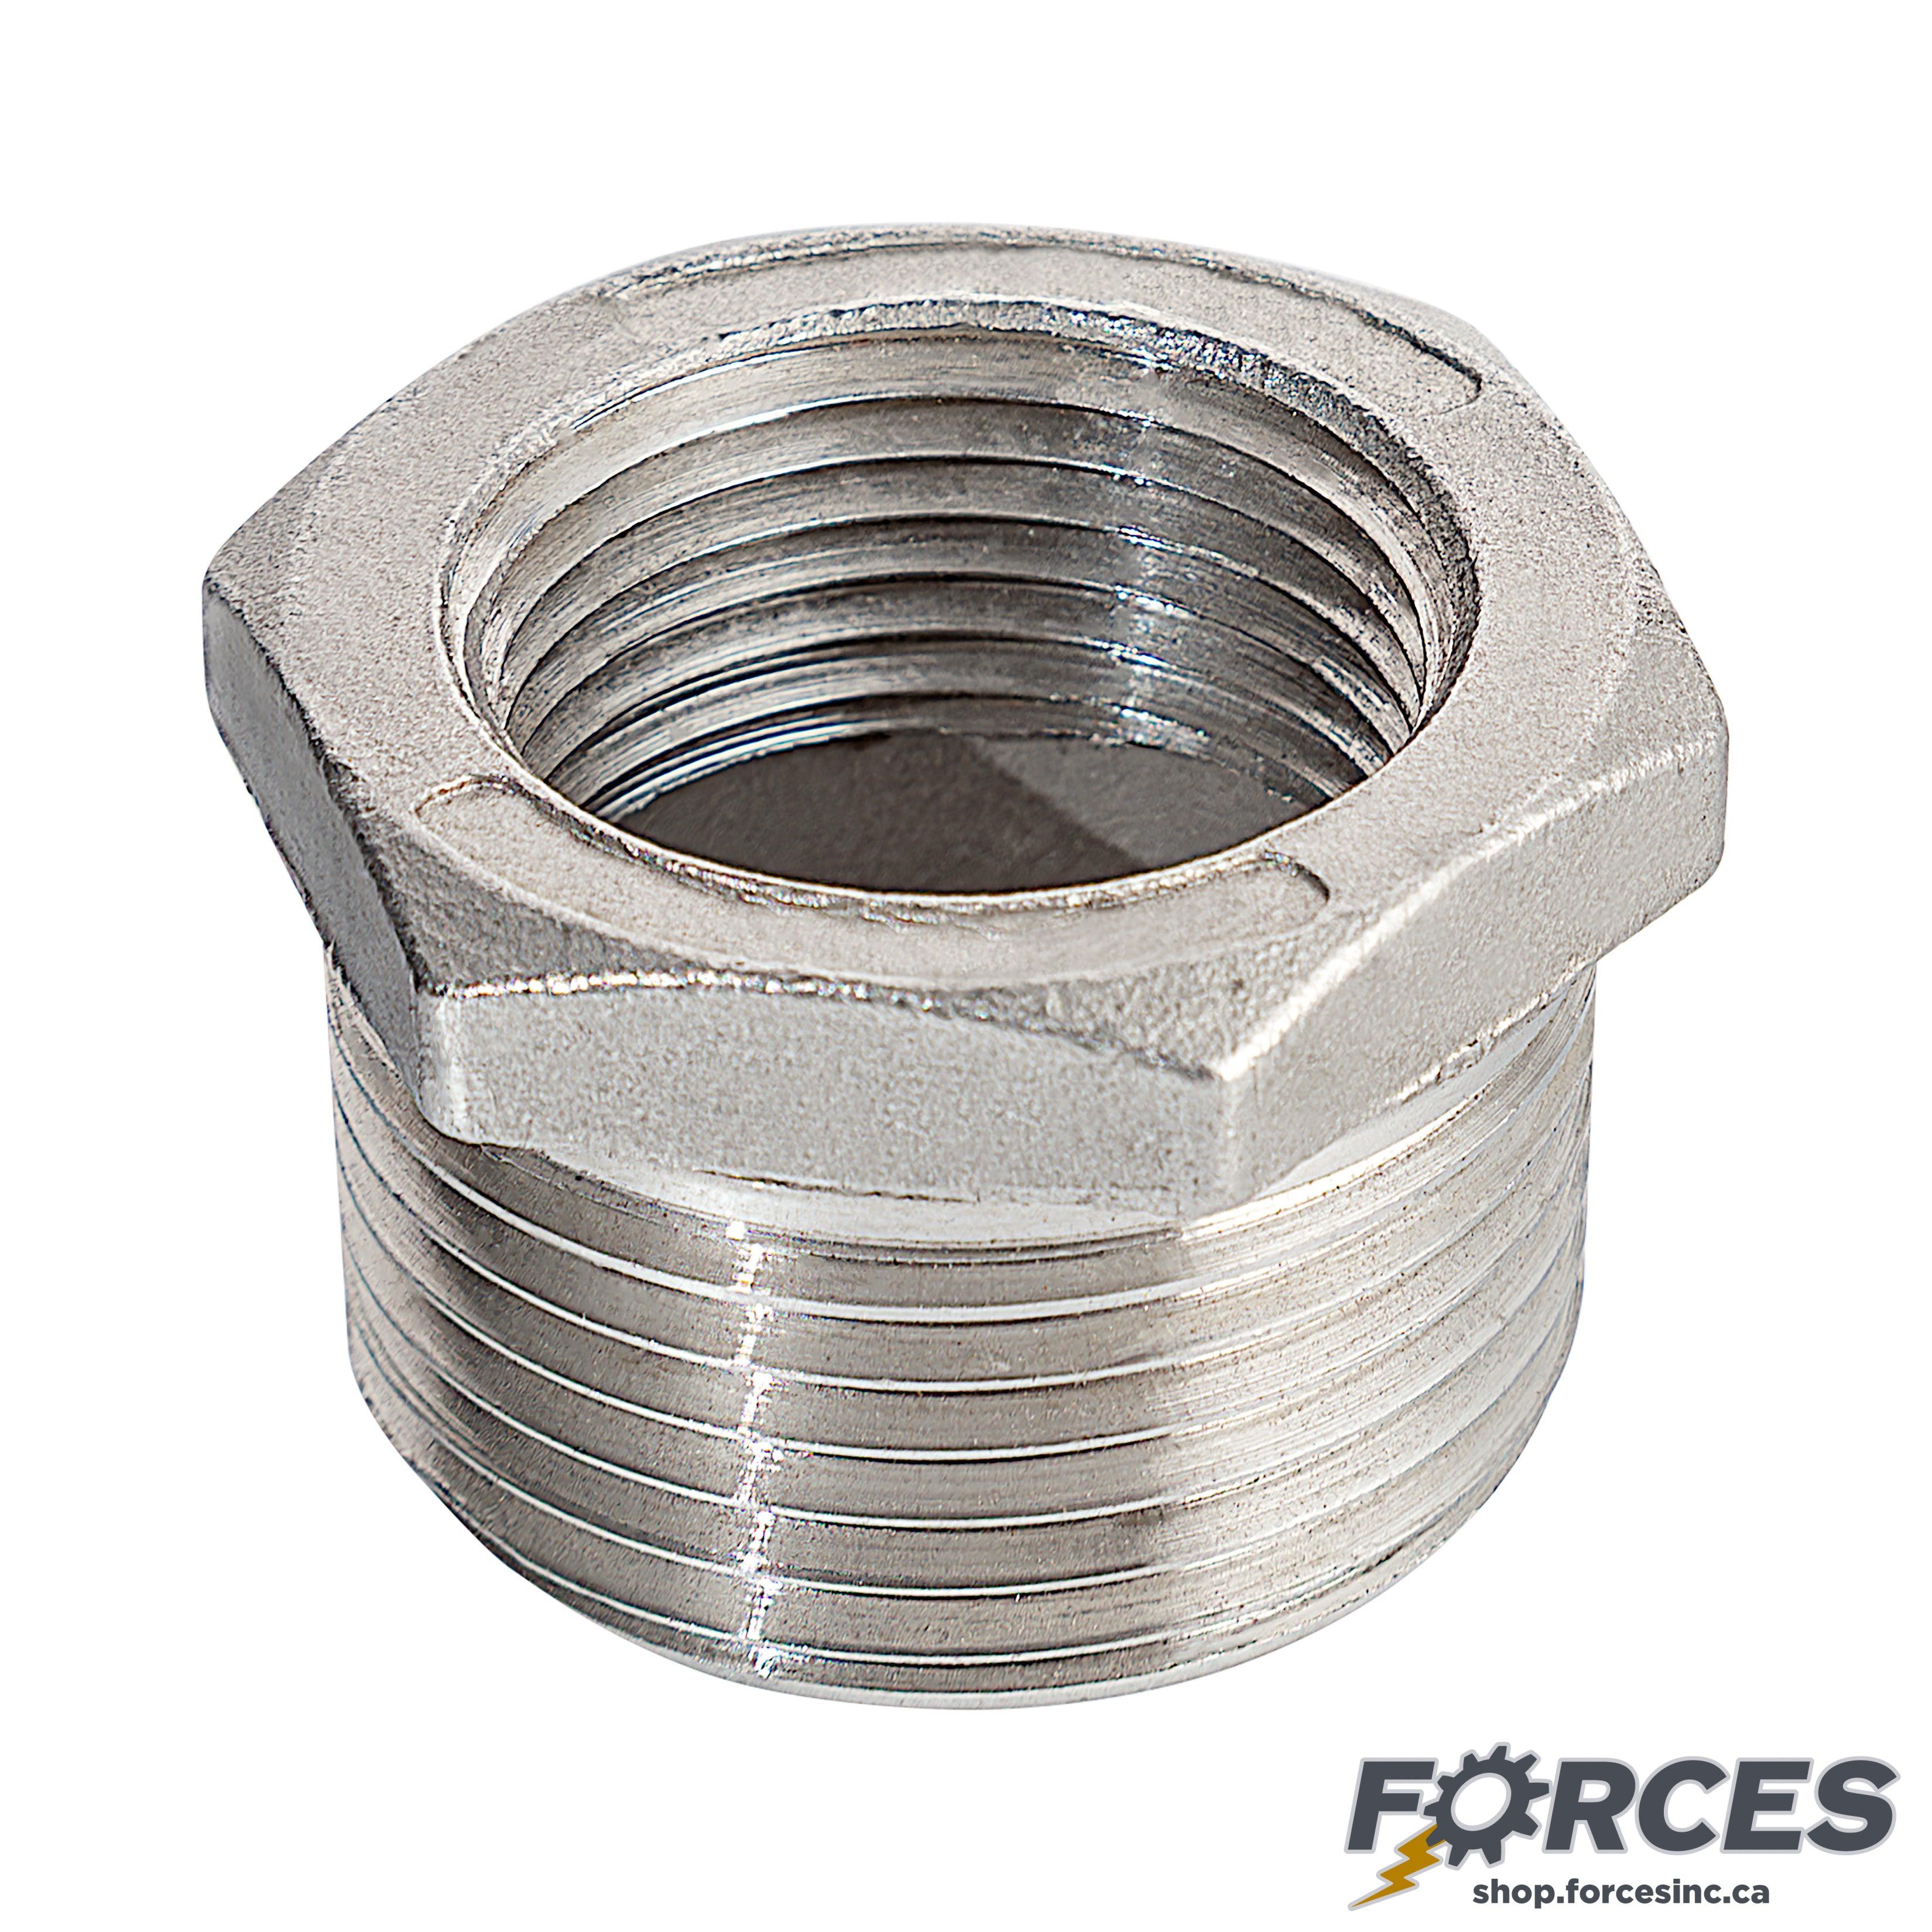 1-1/2" (M) x 1" (F) Reducing Hex Bushing NPT #150 - Stainless Steel 316 - Forces Inc